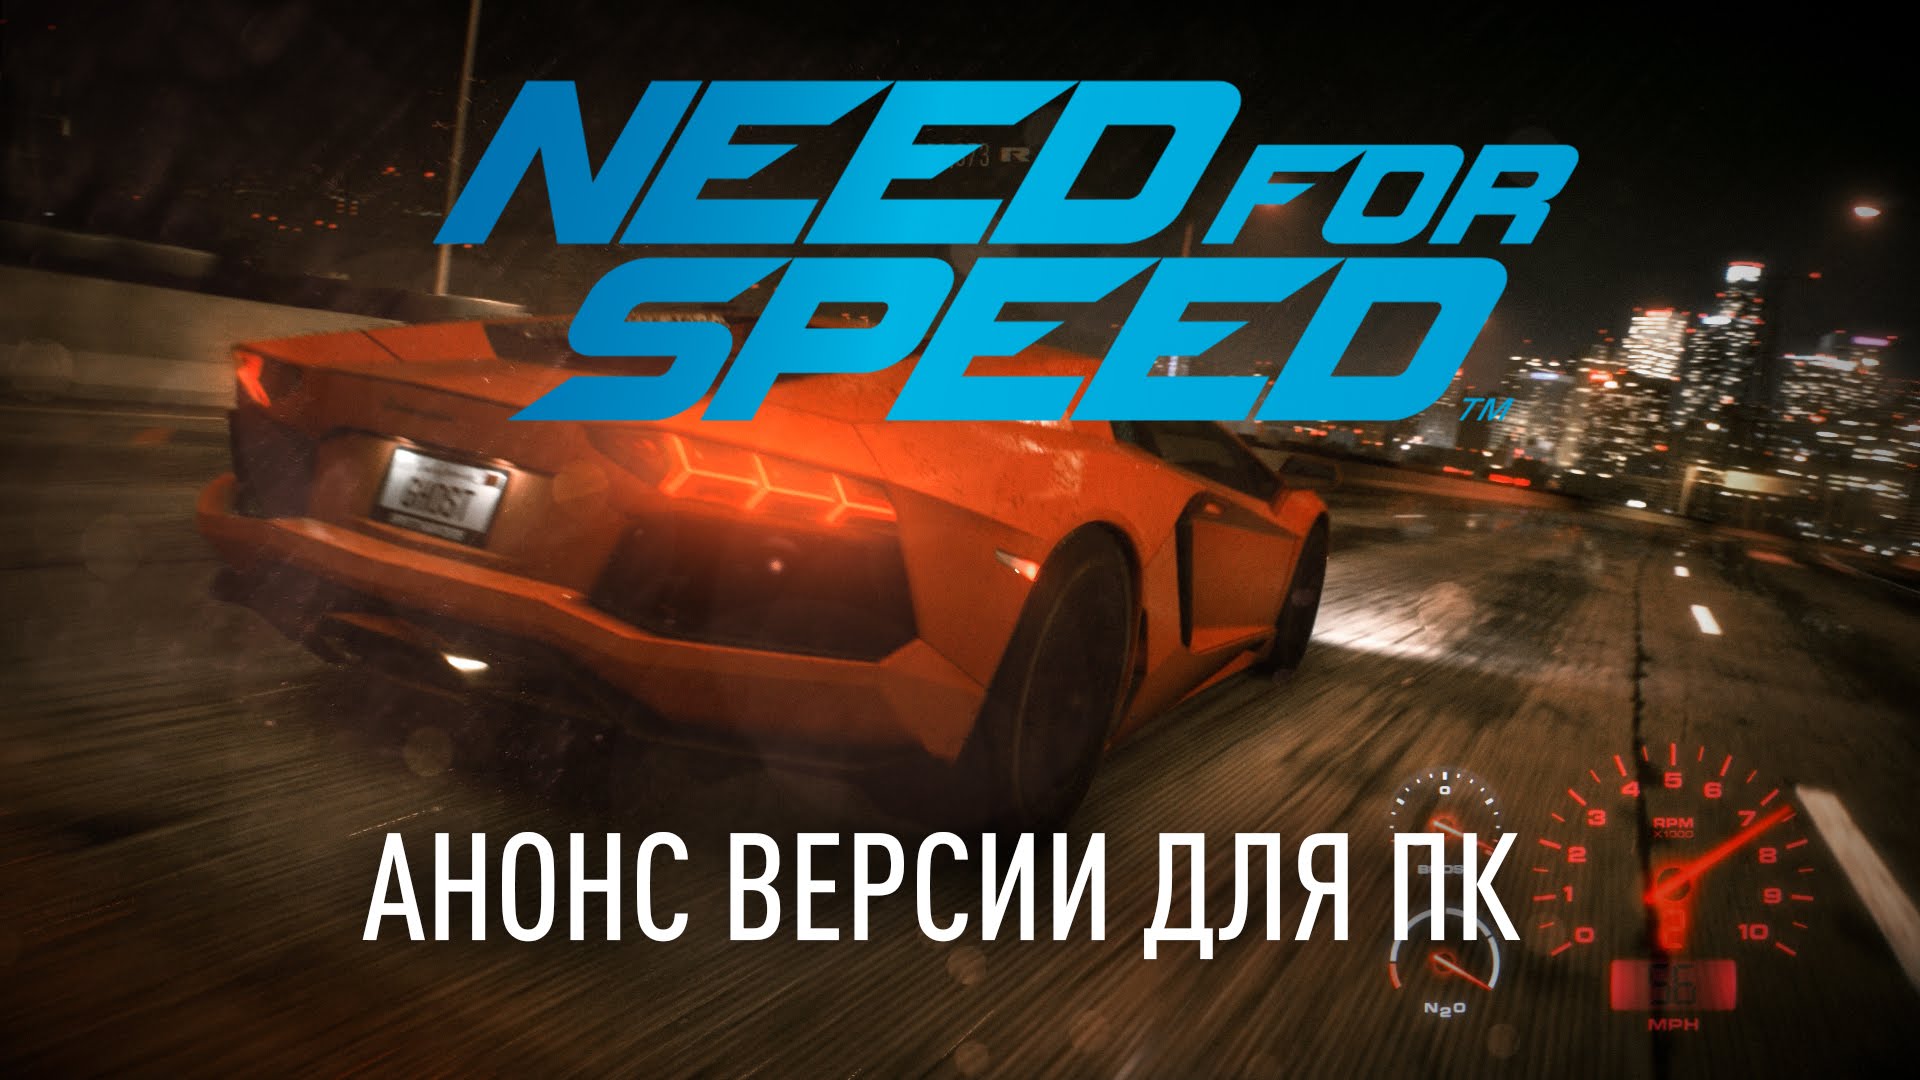 All you need game. Гонки need for Speed трейлер. Need for Drive Team. Live for Speed. Кто такой Speed.